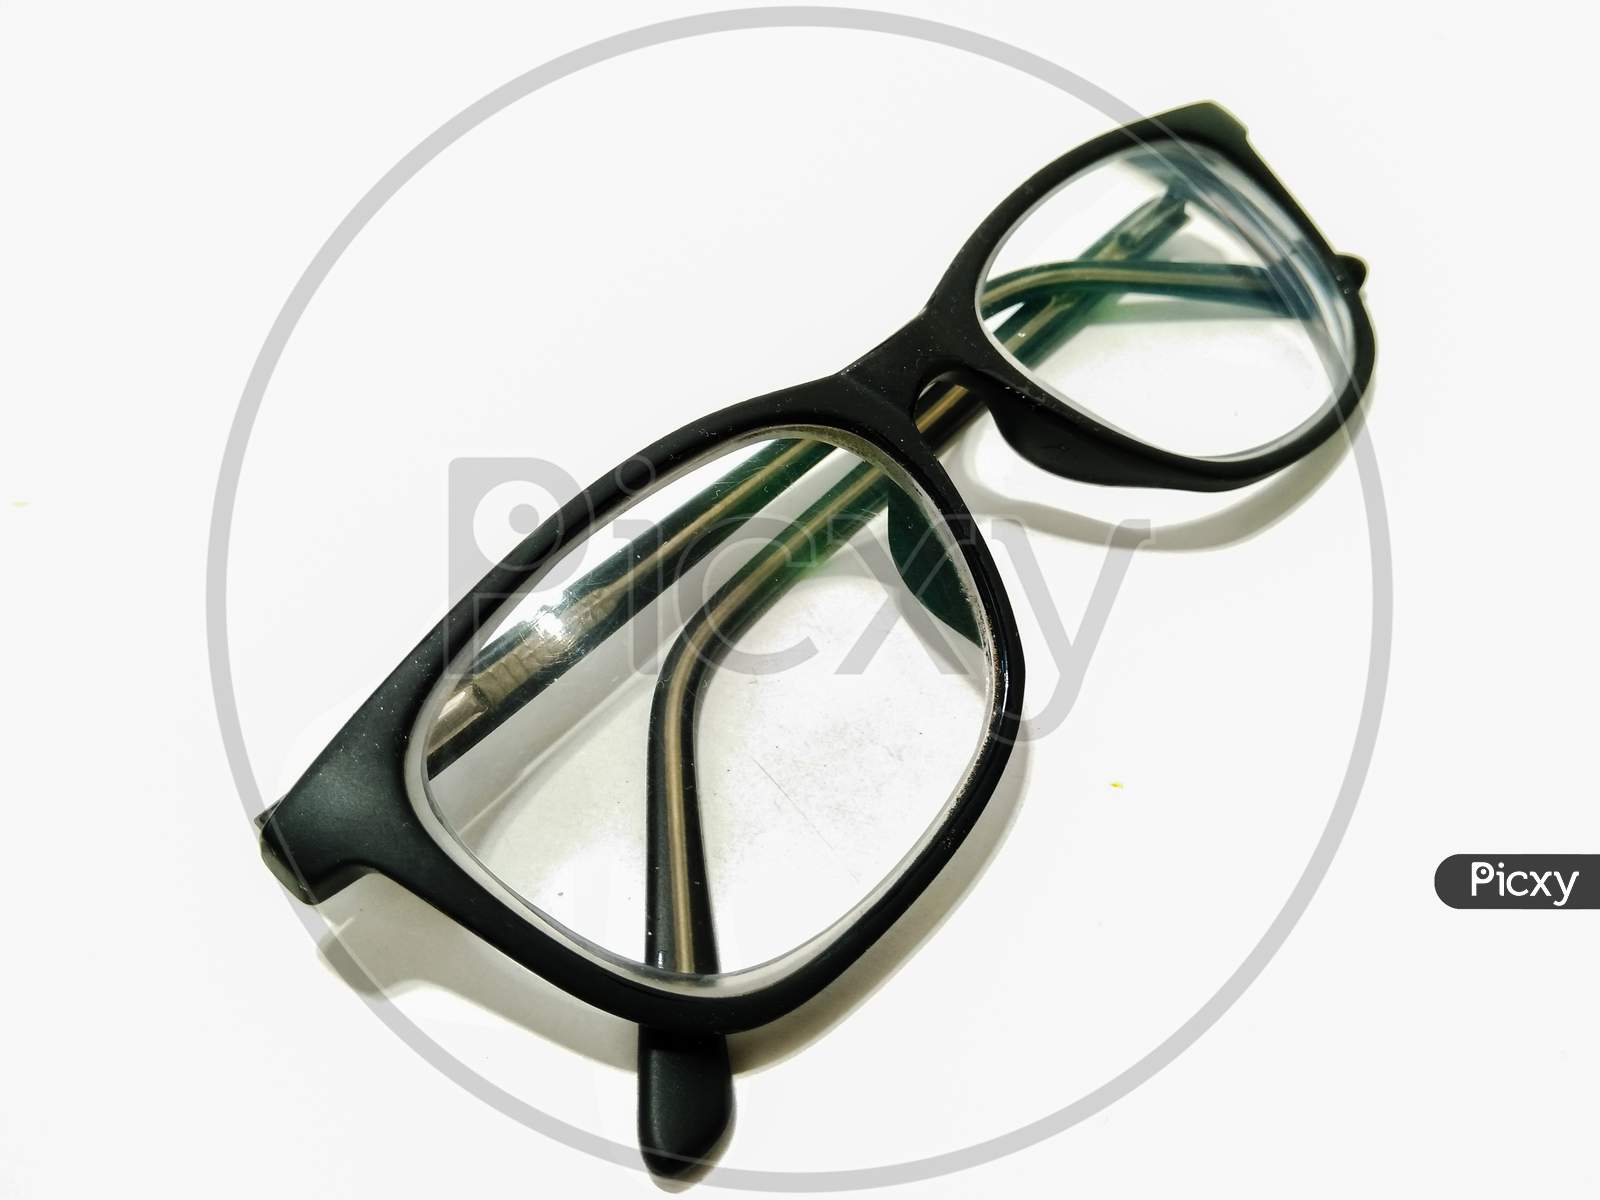 Eye Glasses Or Spects Over an Isolated White Background